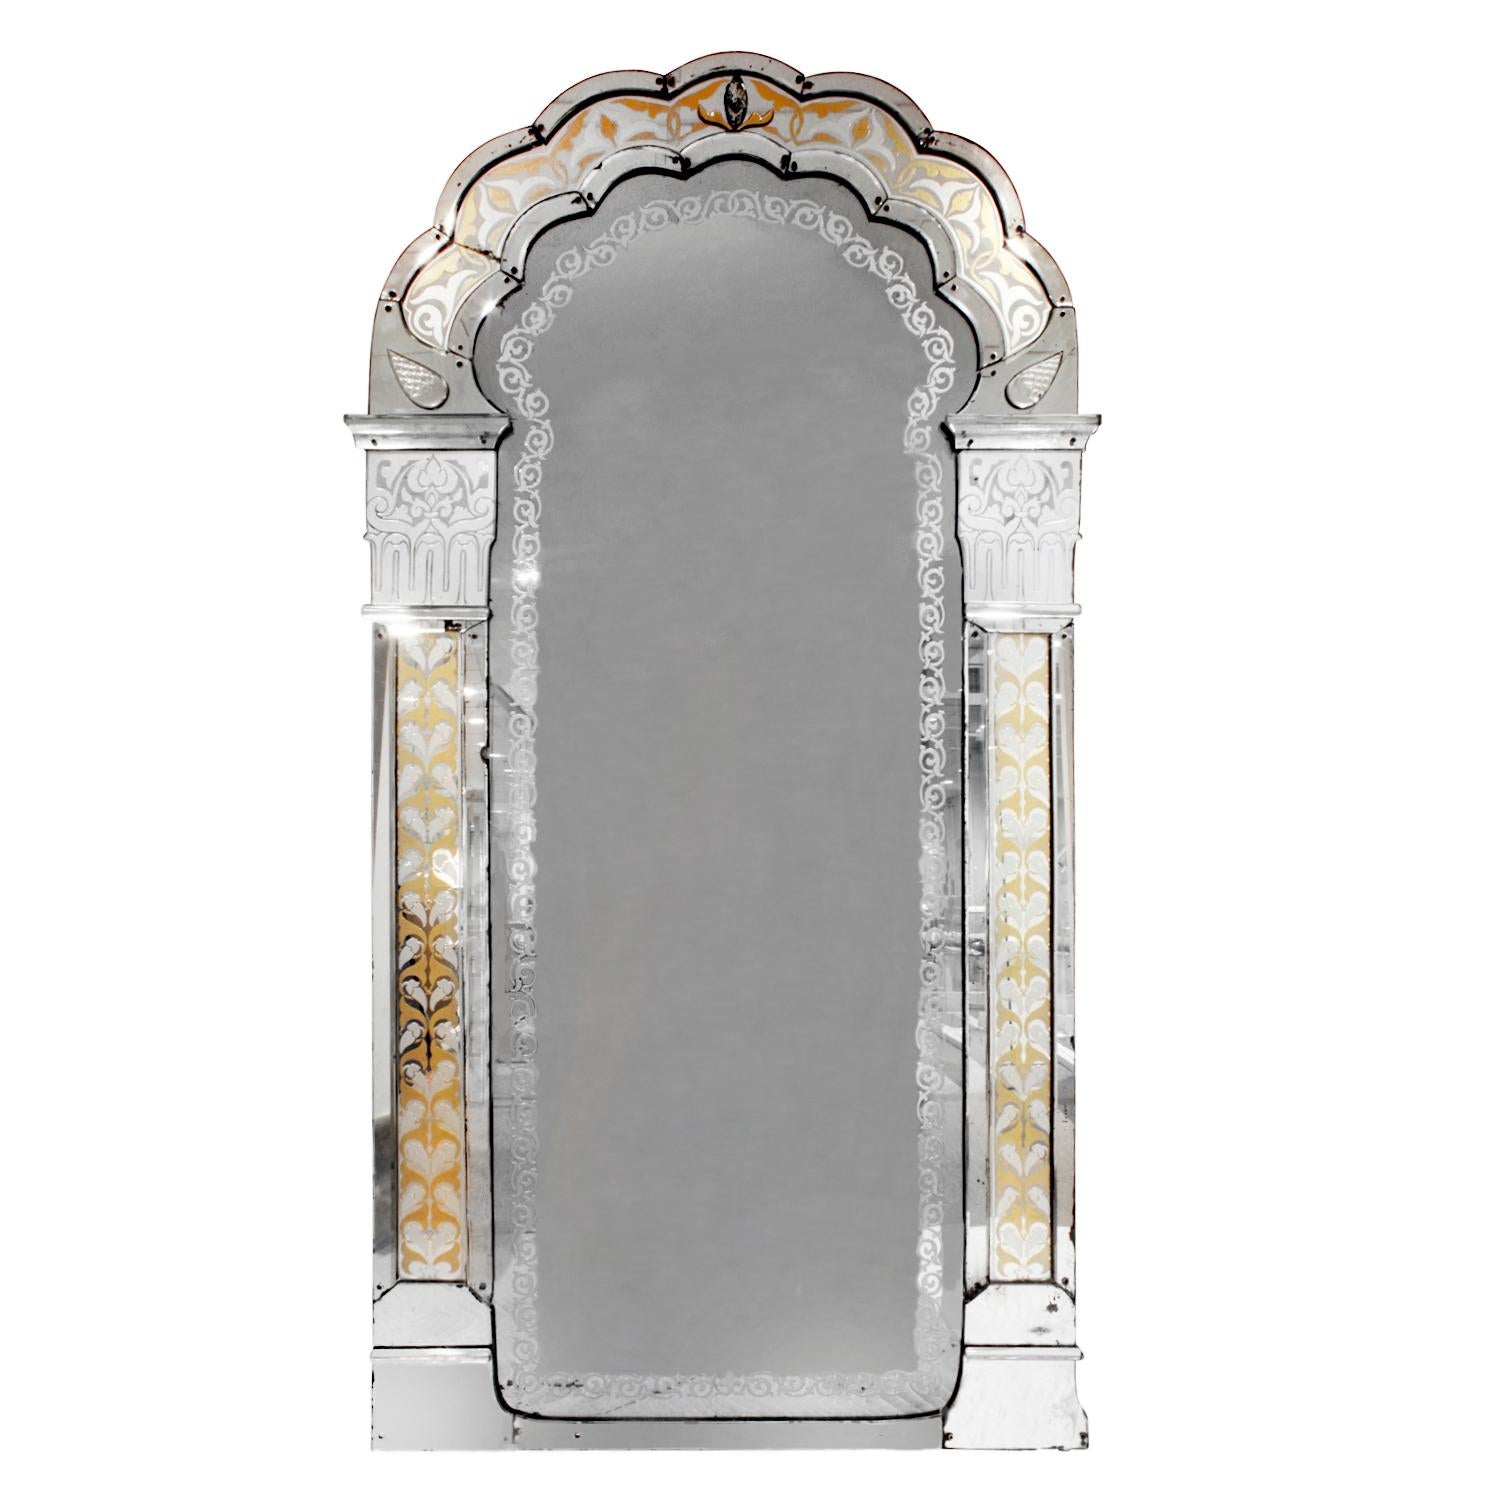 Monumental Venetian Wall Hanging Mirror with Etched Design, 19th century